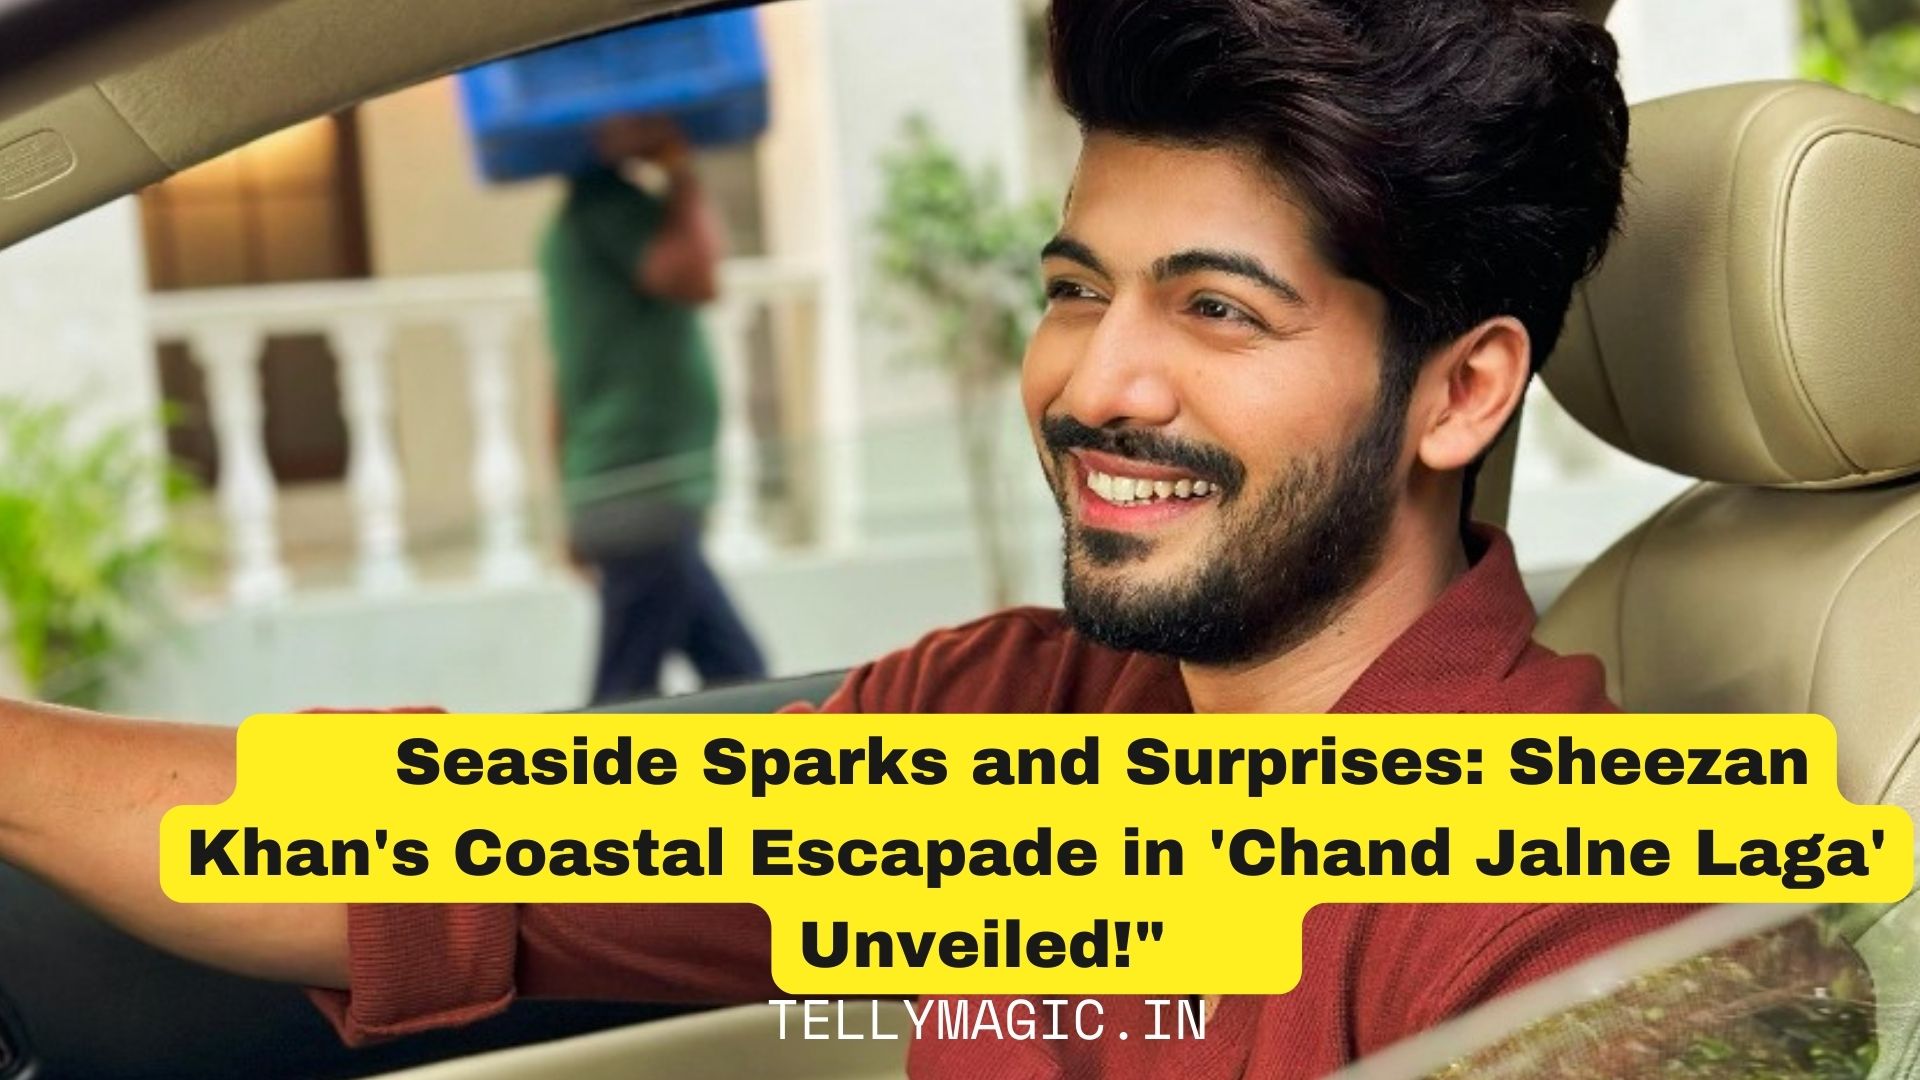 Seaside Sparks and Surprises: Sheezan Khan’s Coastal Escapade in ‘Chand Jalne Laga’ Unveiled!”